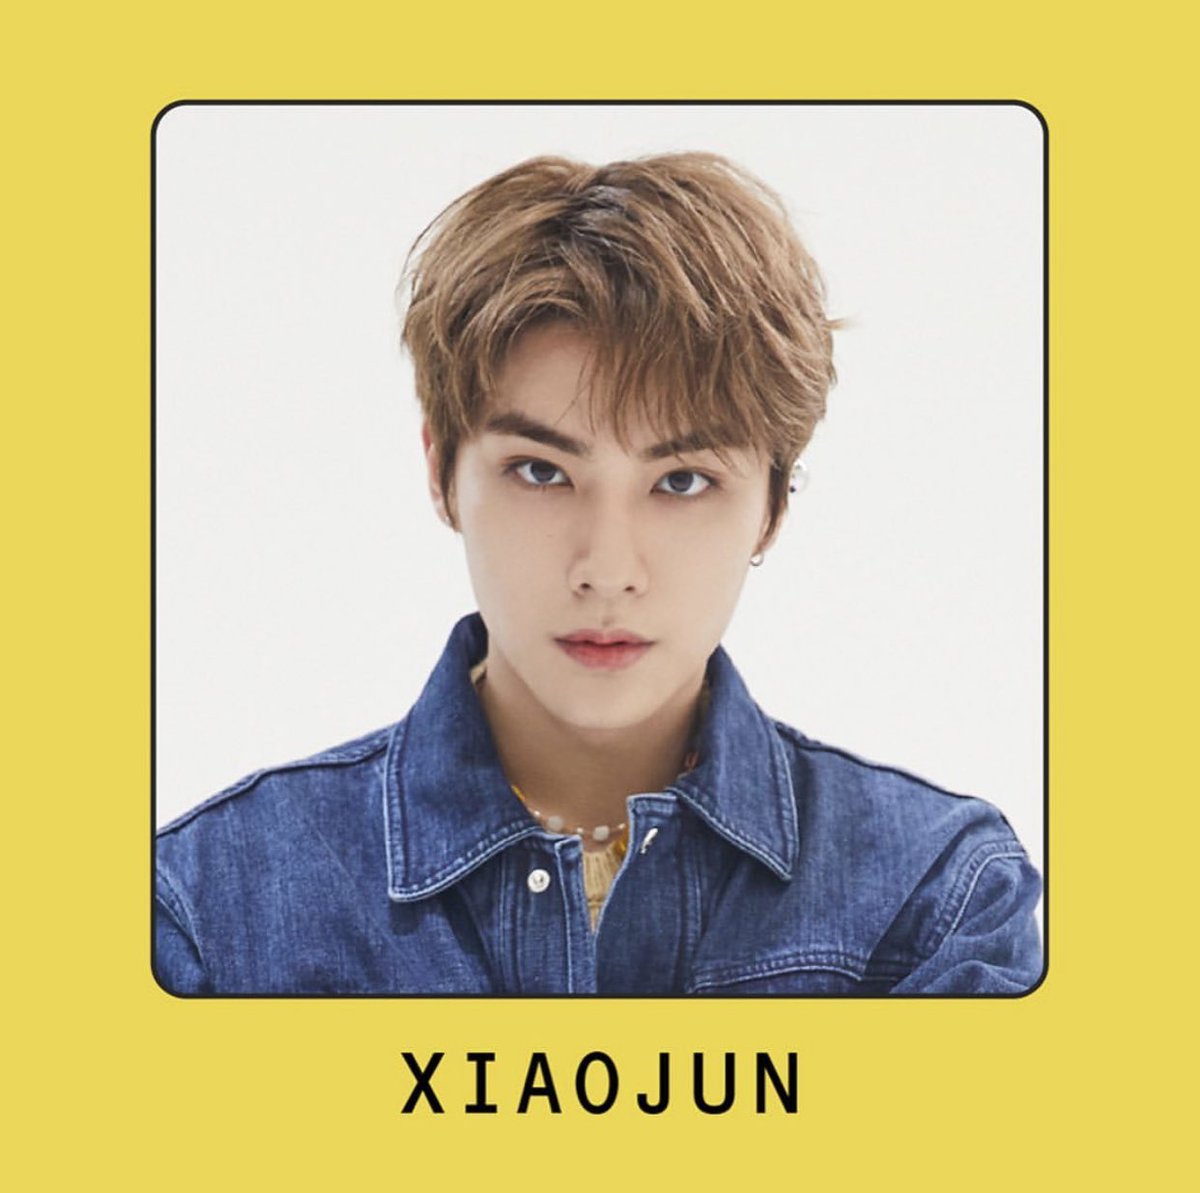 xiaojun (샤오쥔)full name: xiao dejun (宵德俊)birthday: aug. 8, 1999 (leo)birthplace: dongguan, guangdong chinaposition: main vocalist, sub rapperheight: 170 cm (5’7”) shortesttrainee since: [not found]units: wayv, nct ustans: kuanggong